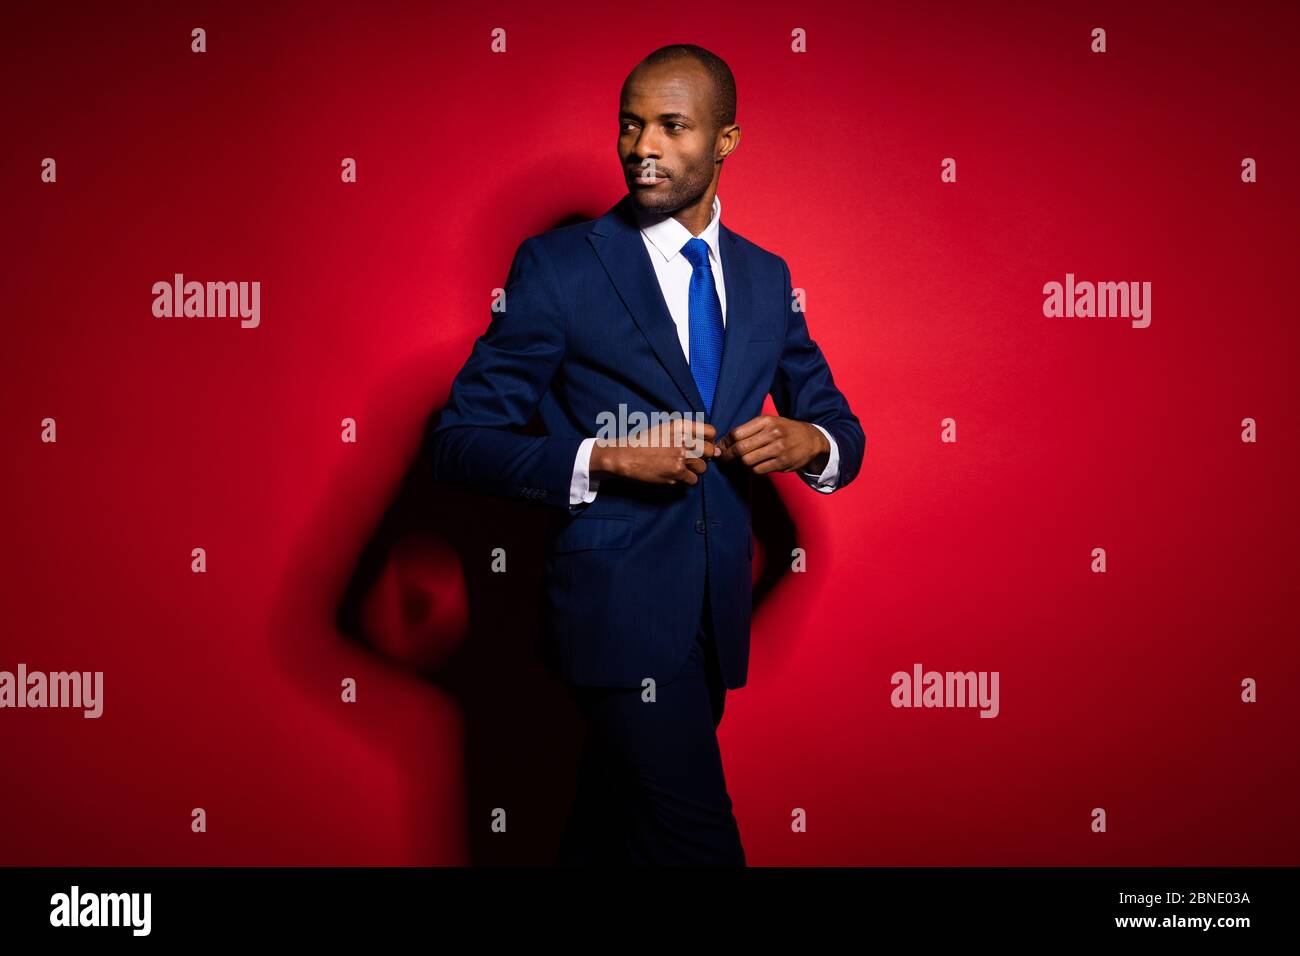 Portrait Of A Stylish Male In A Black Suit And Red Tie Isolated On